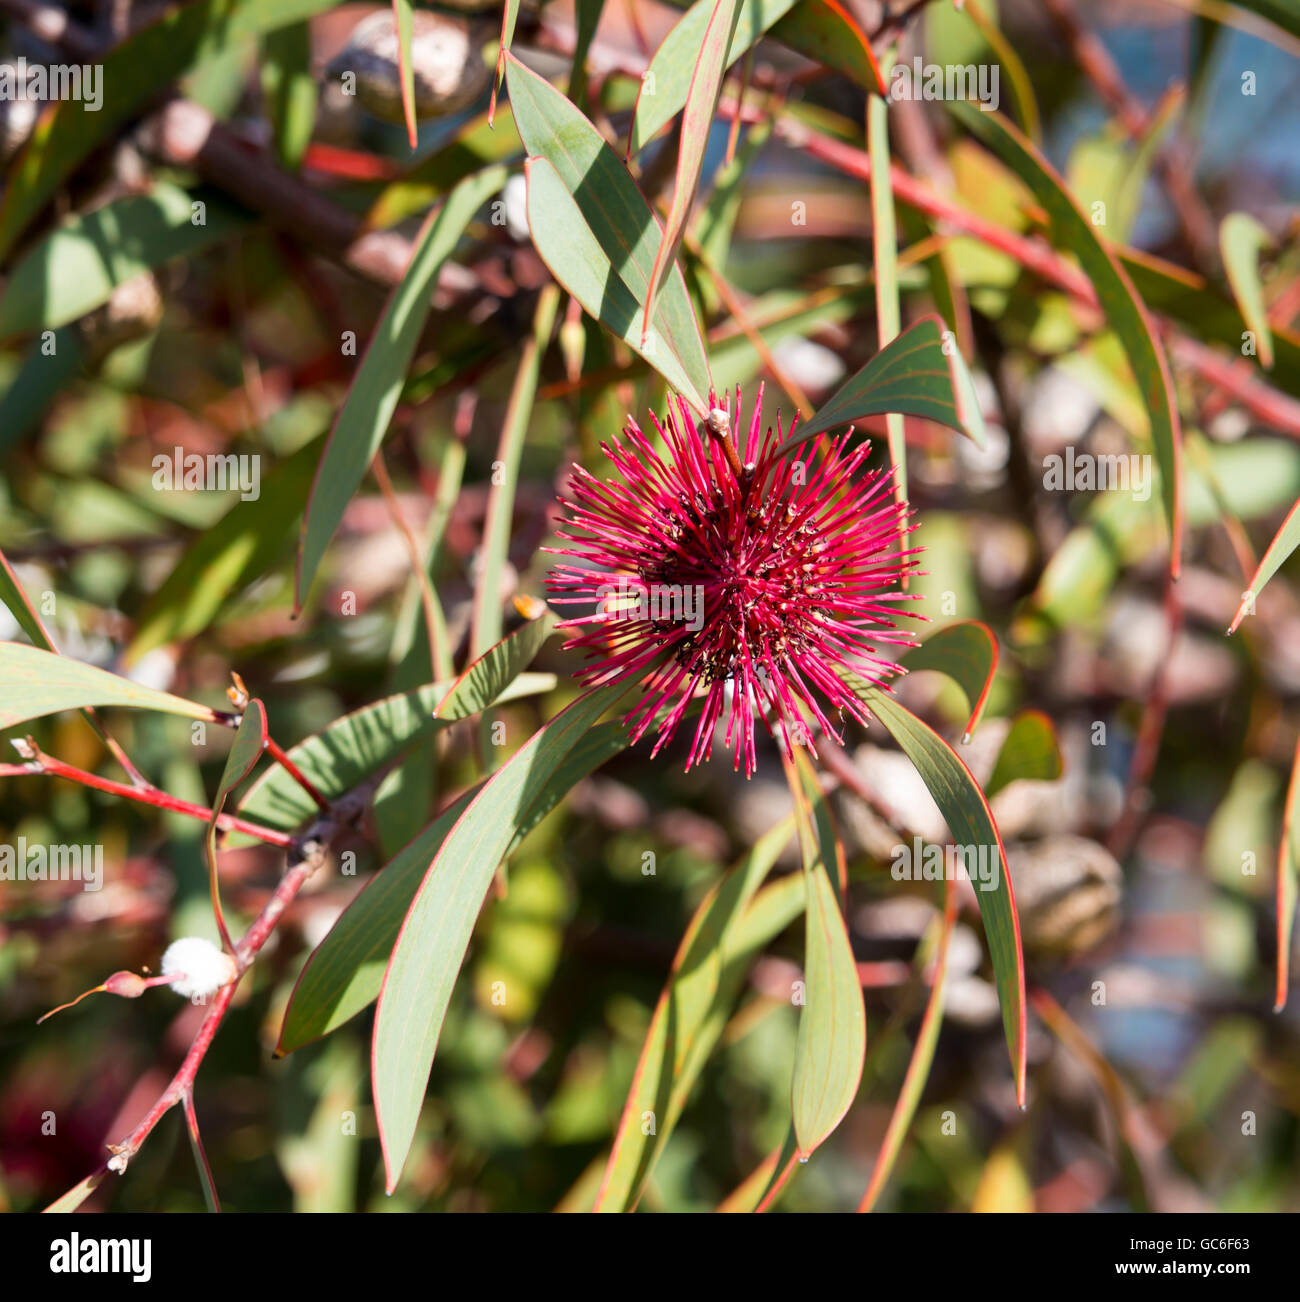 Spiky pink blooms of pincushion hakea , hakea laurina, a West Australian native  shrubby small tree flowering in early  winter attracts bees and birds. Stock Photo